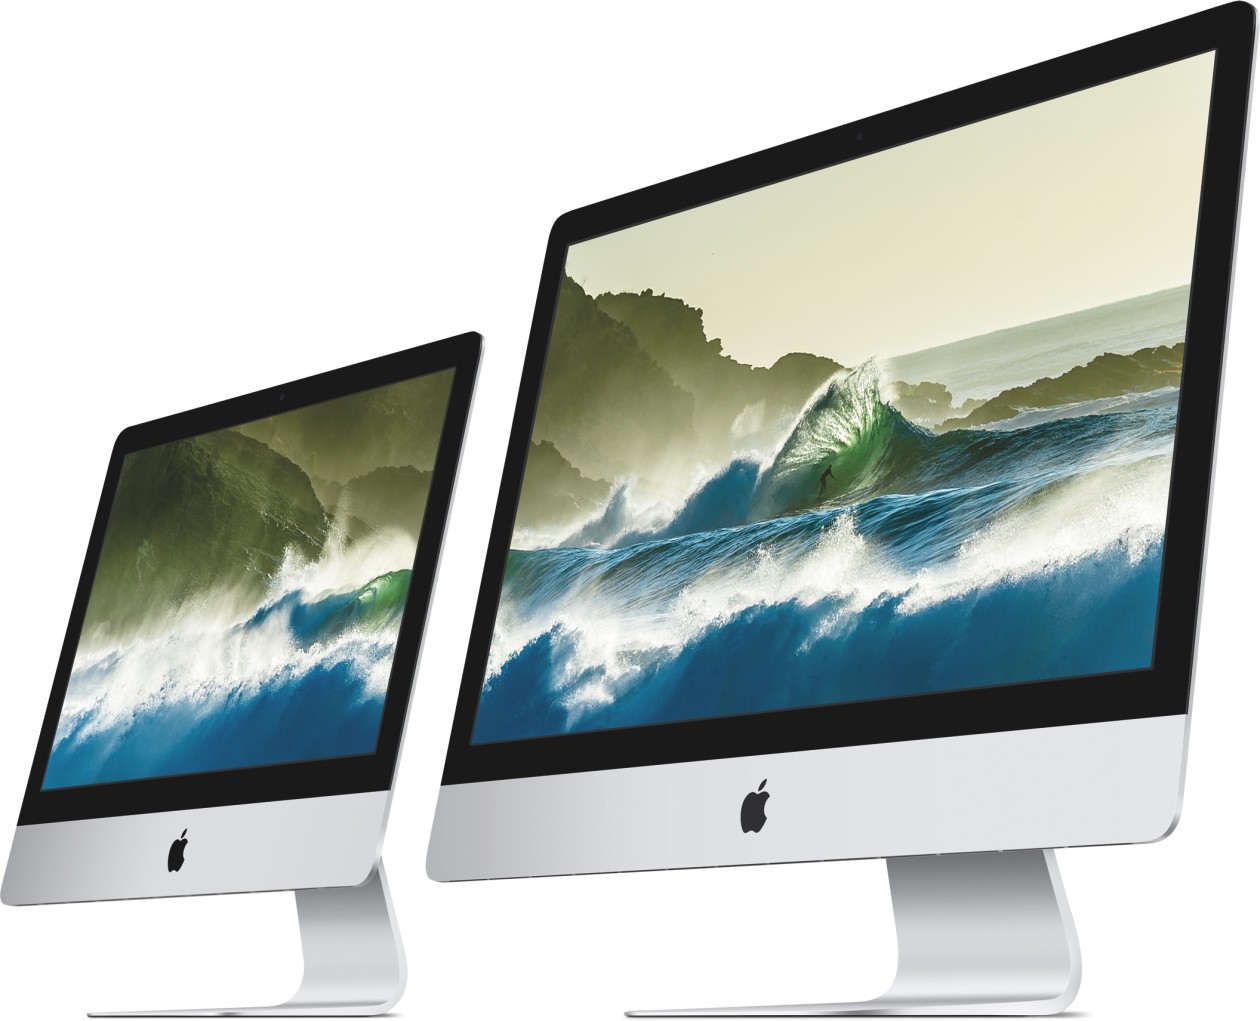 Powerless hinge: iMac owners who have paid for support repair will be compensated by Apple